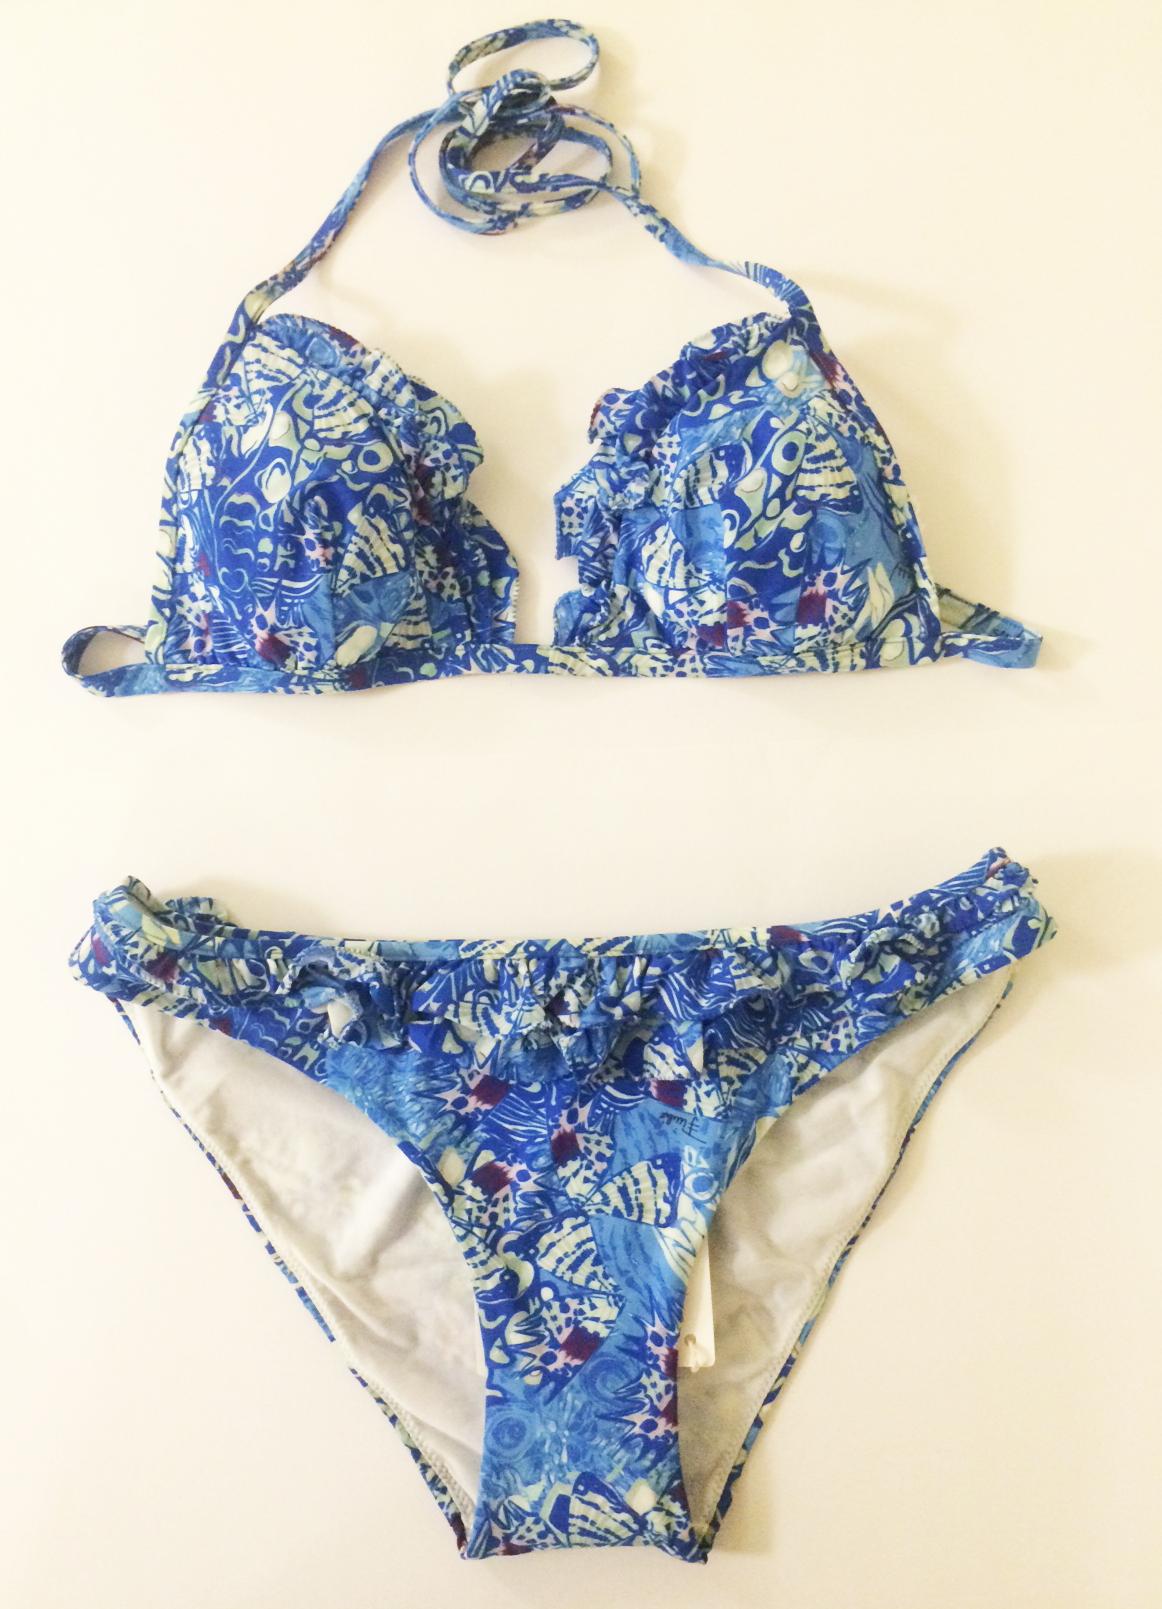 Emilio Pucci new with tags blue bikini bathing suit in a print that looks like butterfly wings. Ruffle trim. Halter tie at top and Pucci emblem closure at back. 

72% nylon, 28% elastane. Fully lined.

Made in Italy.

Size It 42, approximate US 4/6.